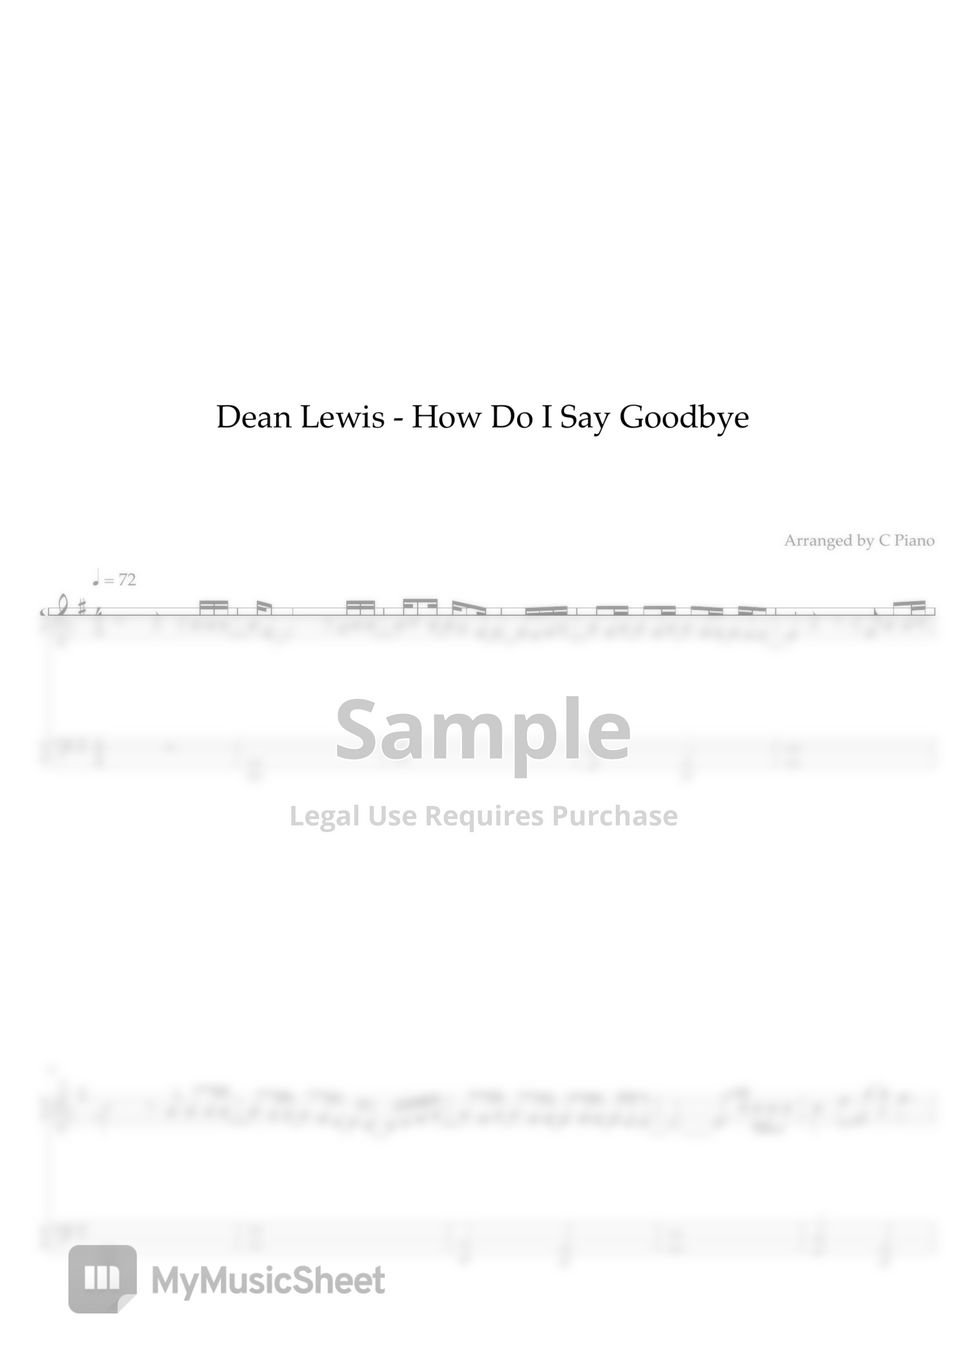 Dean Lewis - How Do I Say Goodbye (Easy Version) by C Piano